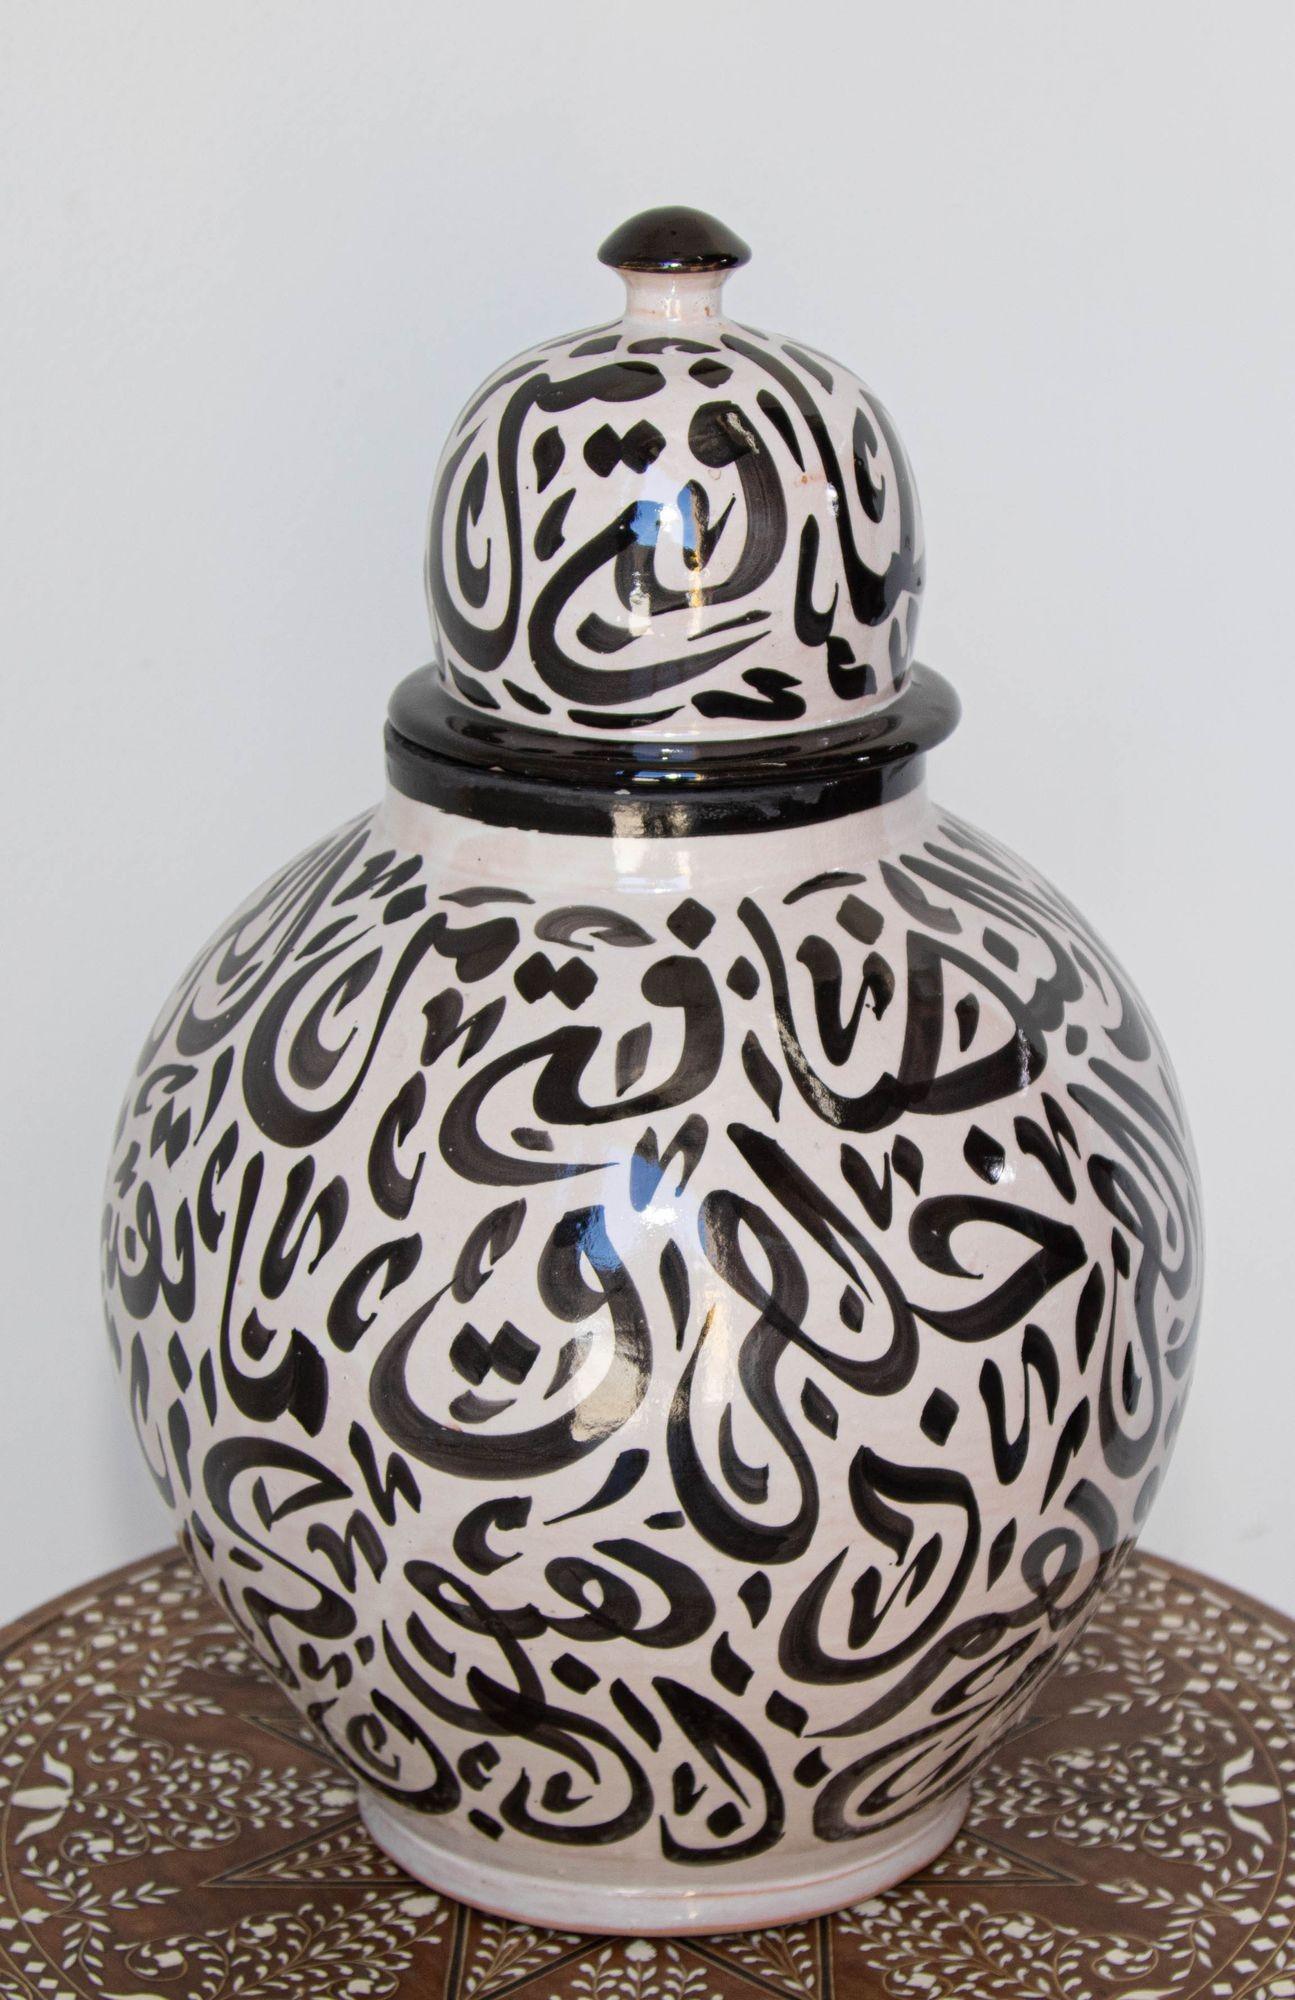 Large Moroccan glazed royal blue ceramic urn with lid from Fez.
Vintage Moorish style ceramic handcrafted and hand painted with Arabic calligraphy writing.
This kind of Art Writing Looks calligraphic is called Lettrism, it is a form of art that